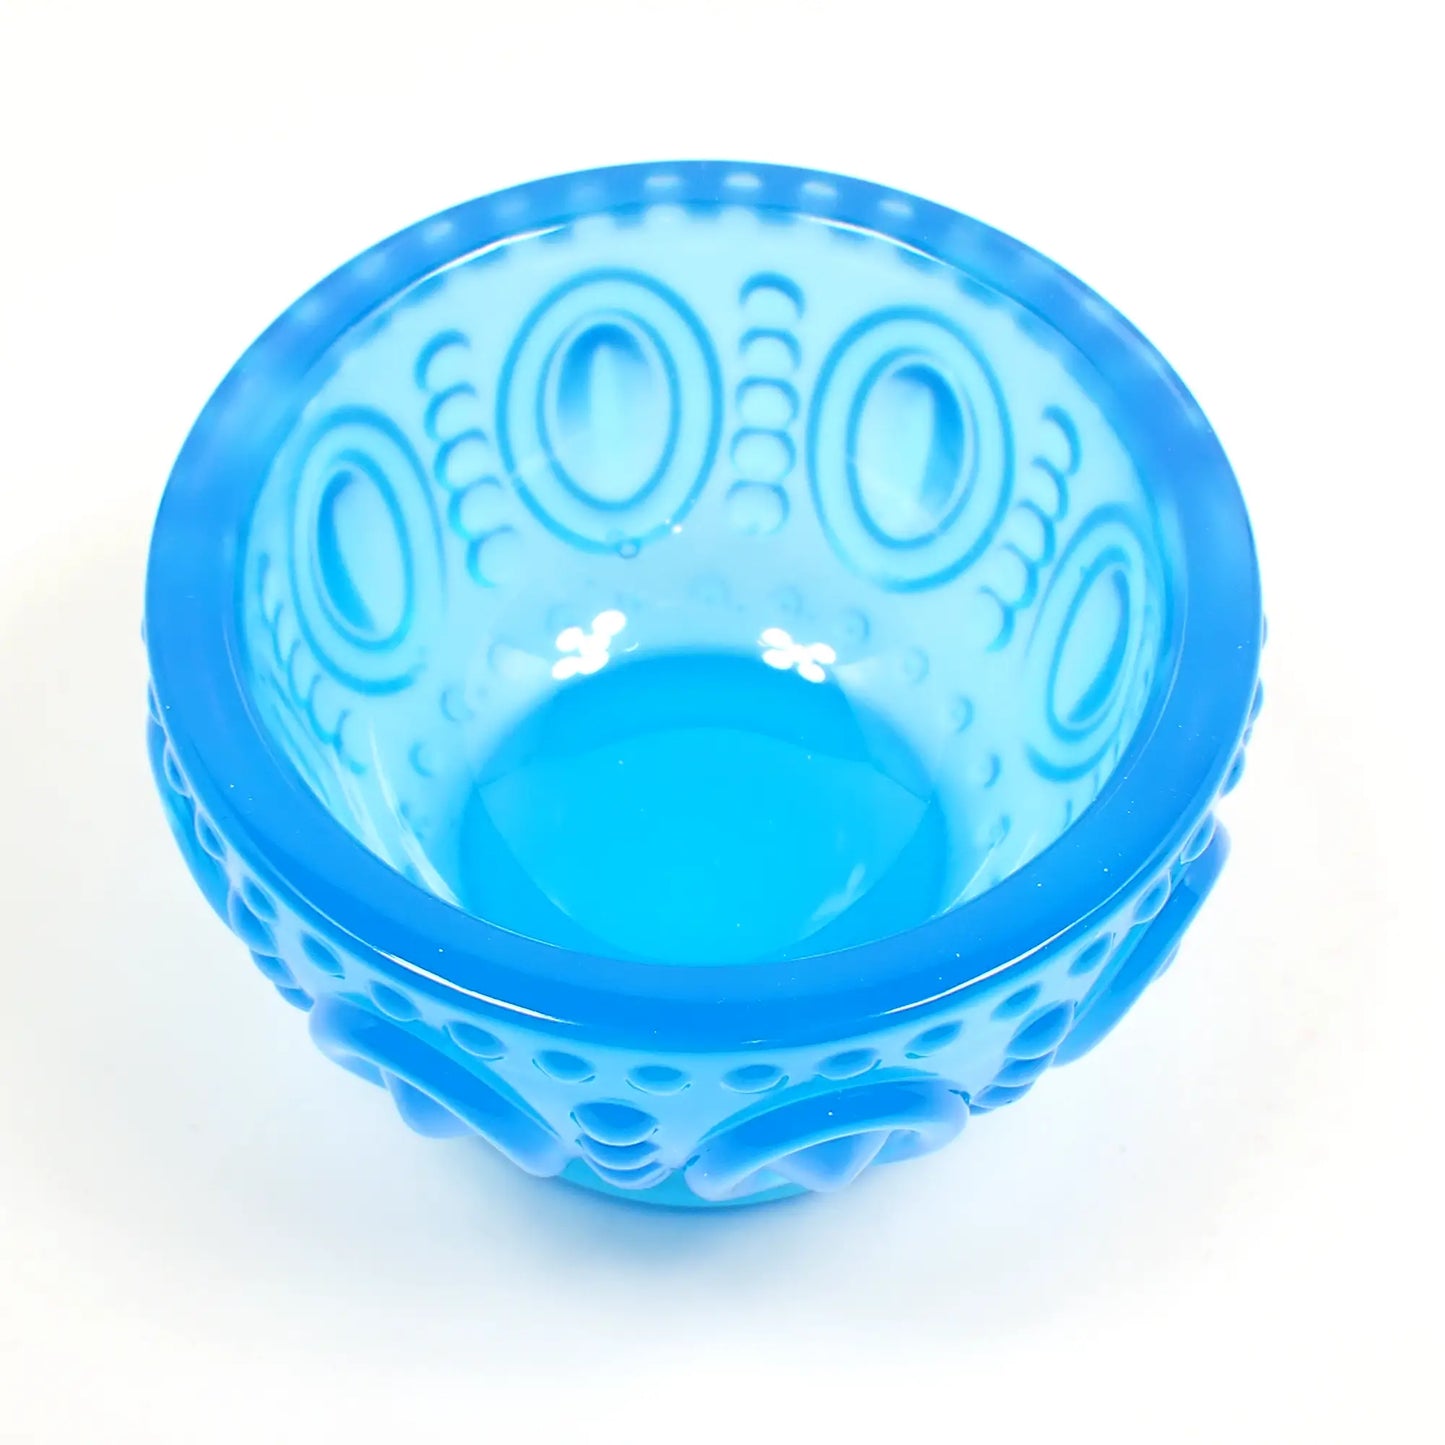 Small Handmade Neon Blue Resin Decorative Footed Bowl with Oval and Dot Pattern